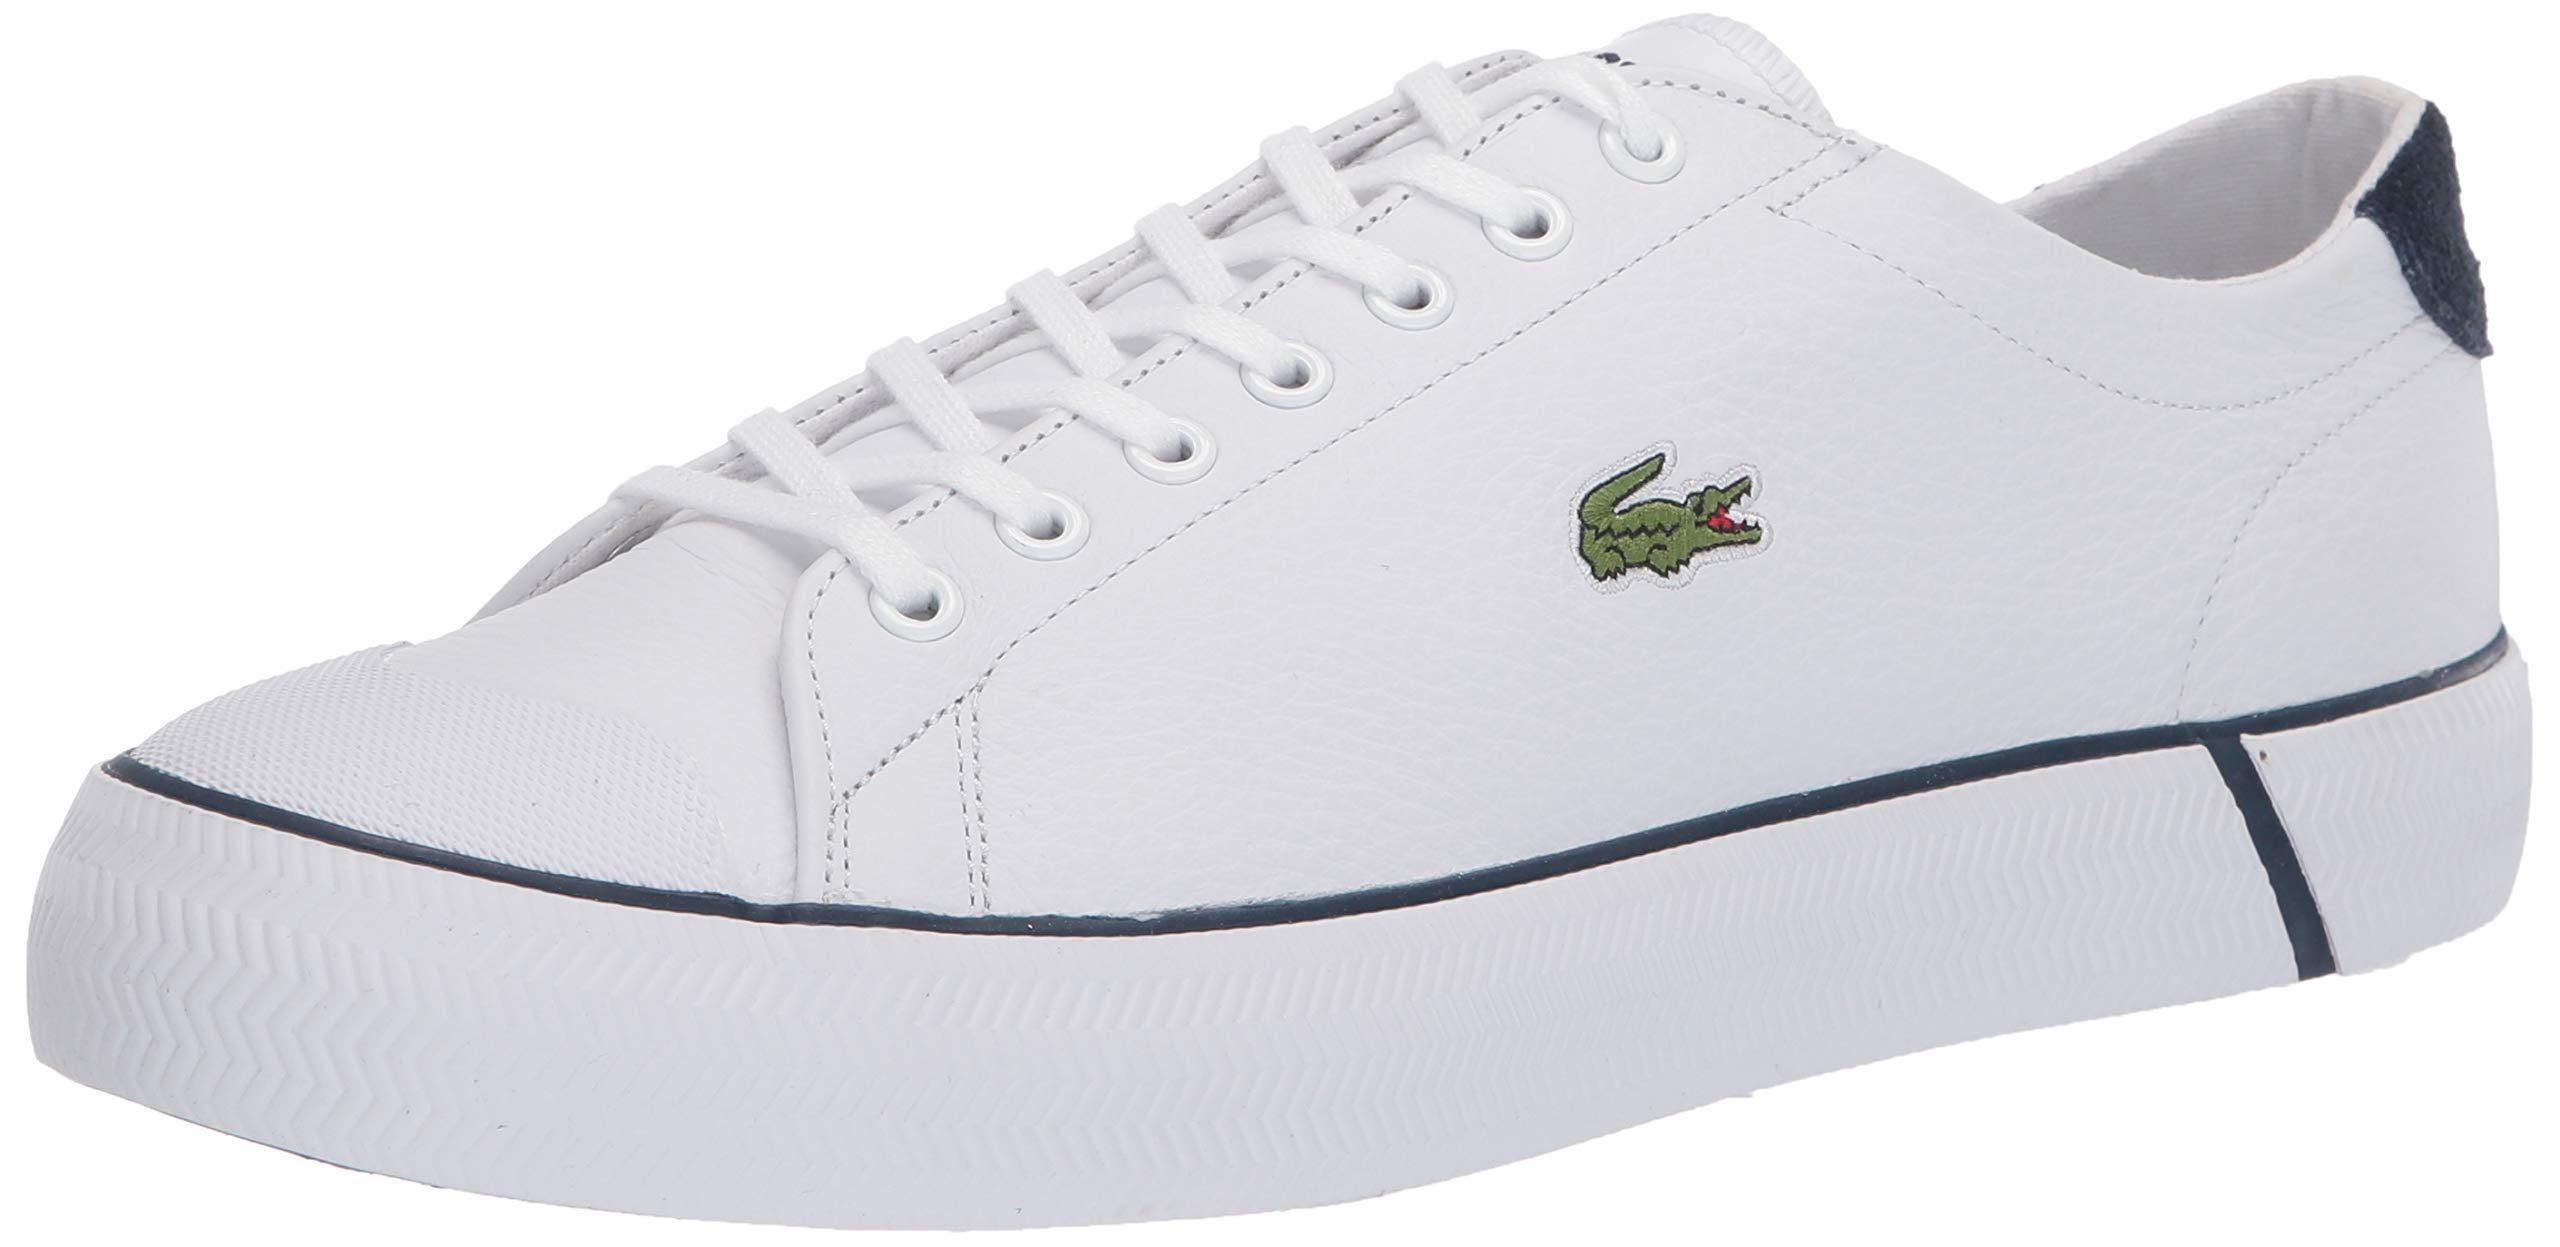 Lacoste Leather Gripshot 120 5 Cma Sneaker in White/Navy (White) for ...